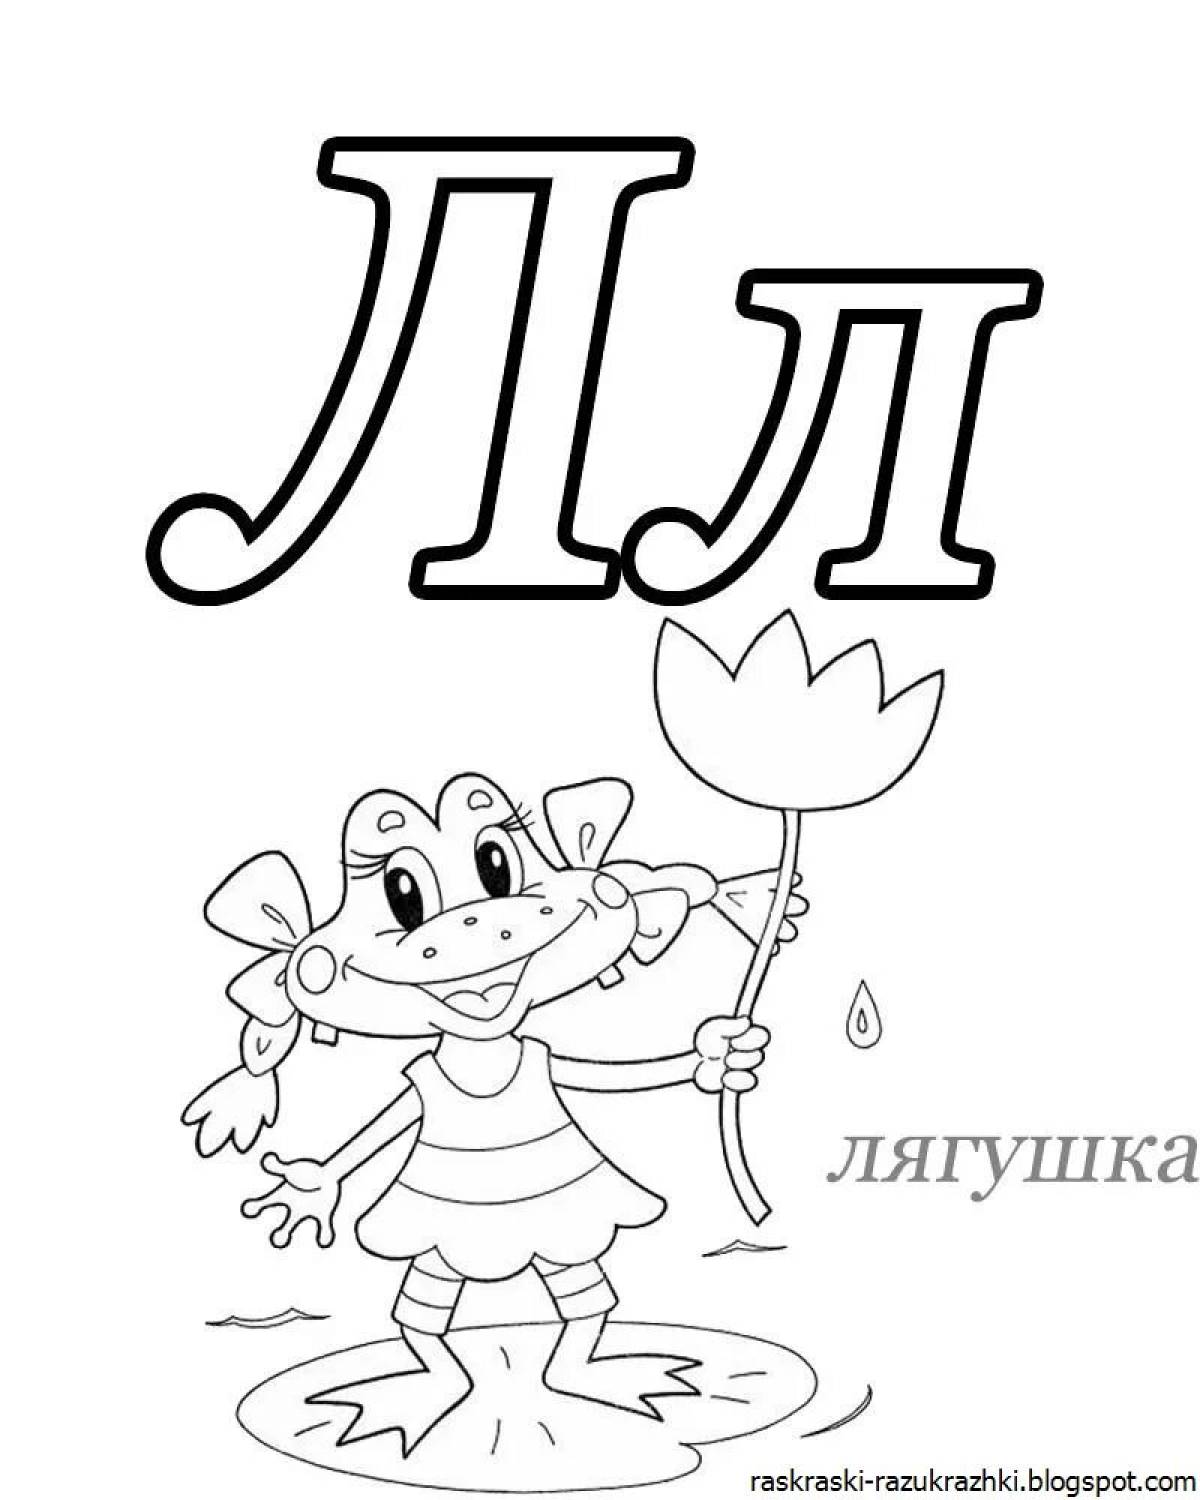 Colorful laura alphabet coloring page for kids